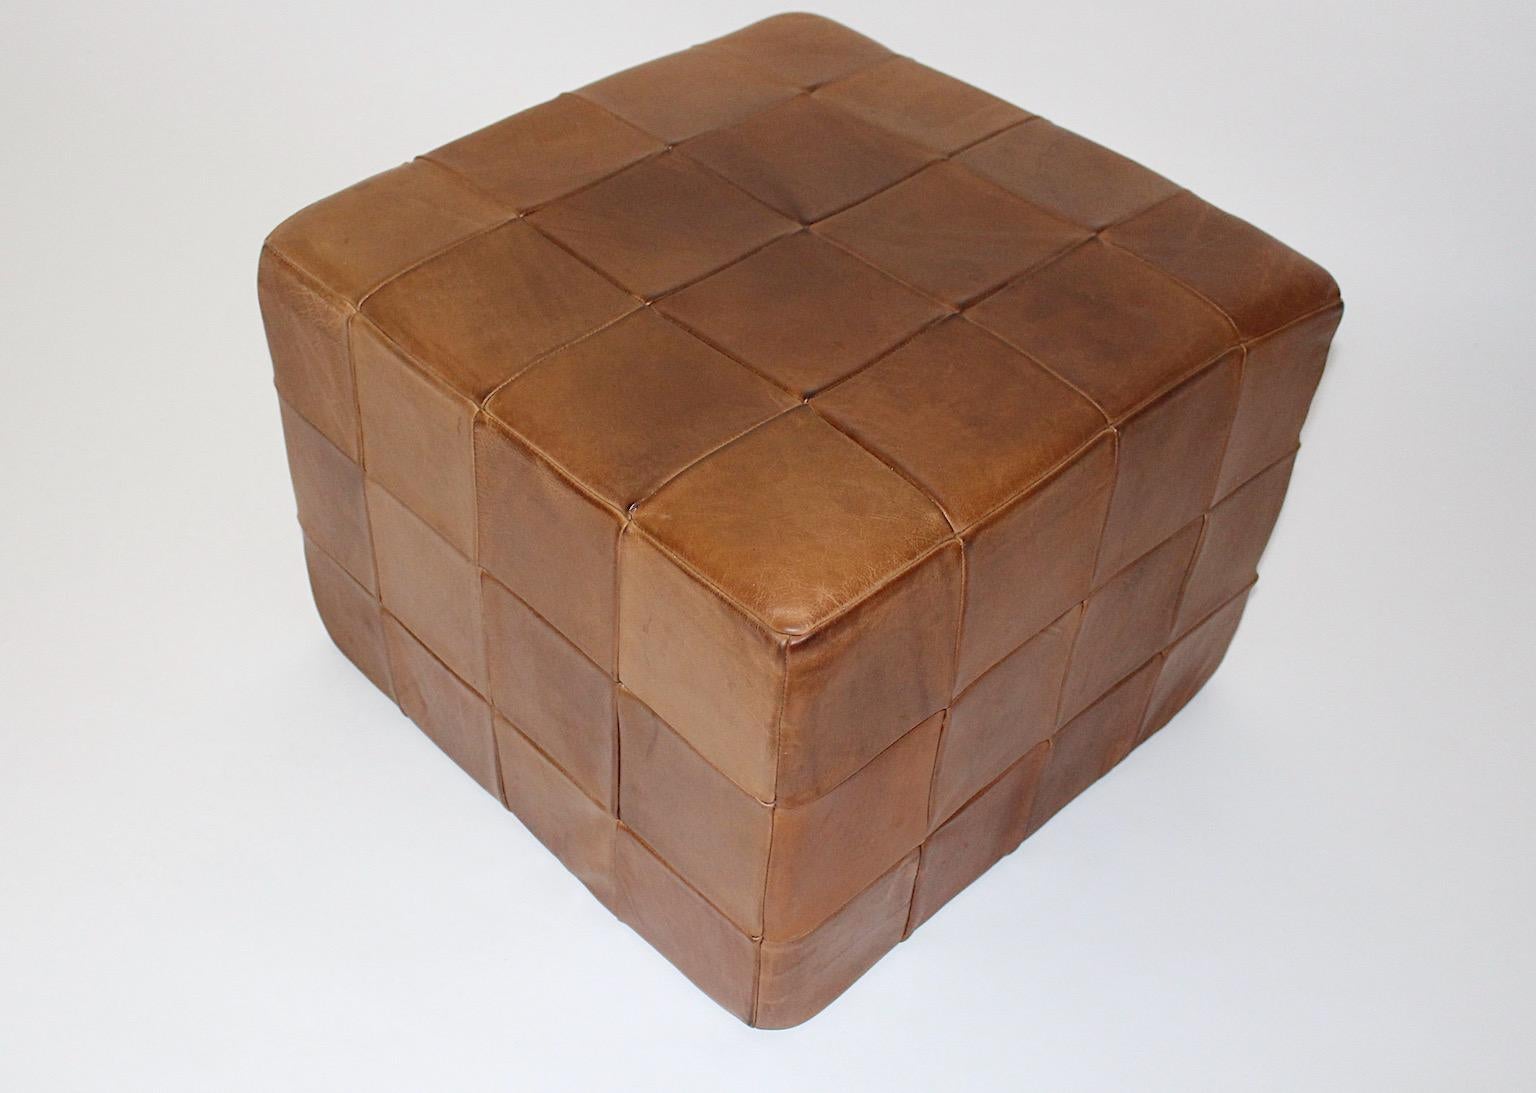 Modernist Organic Vintage Brown Patchwork Leather Cubus Stool DeSede 1970s For Sale 11